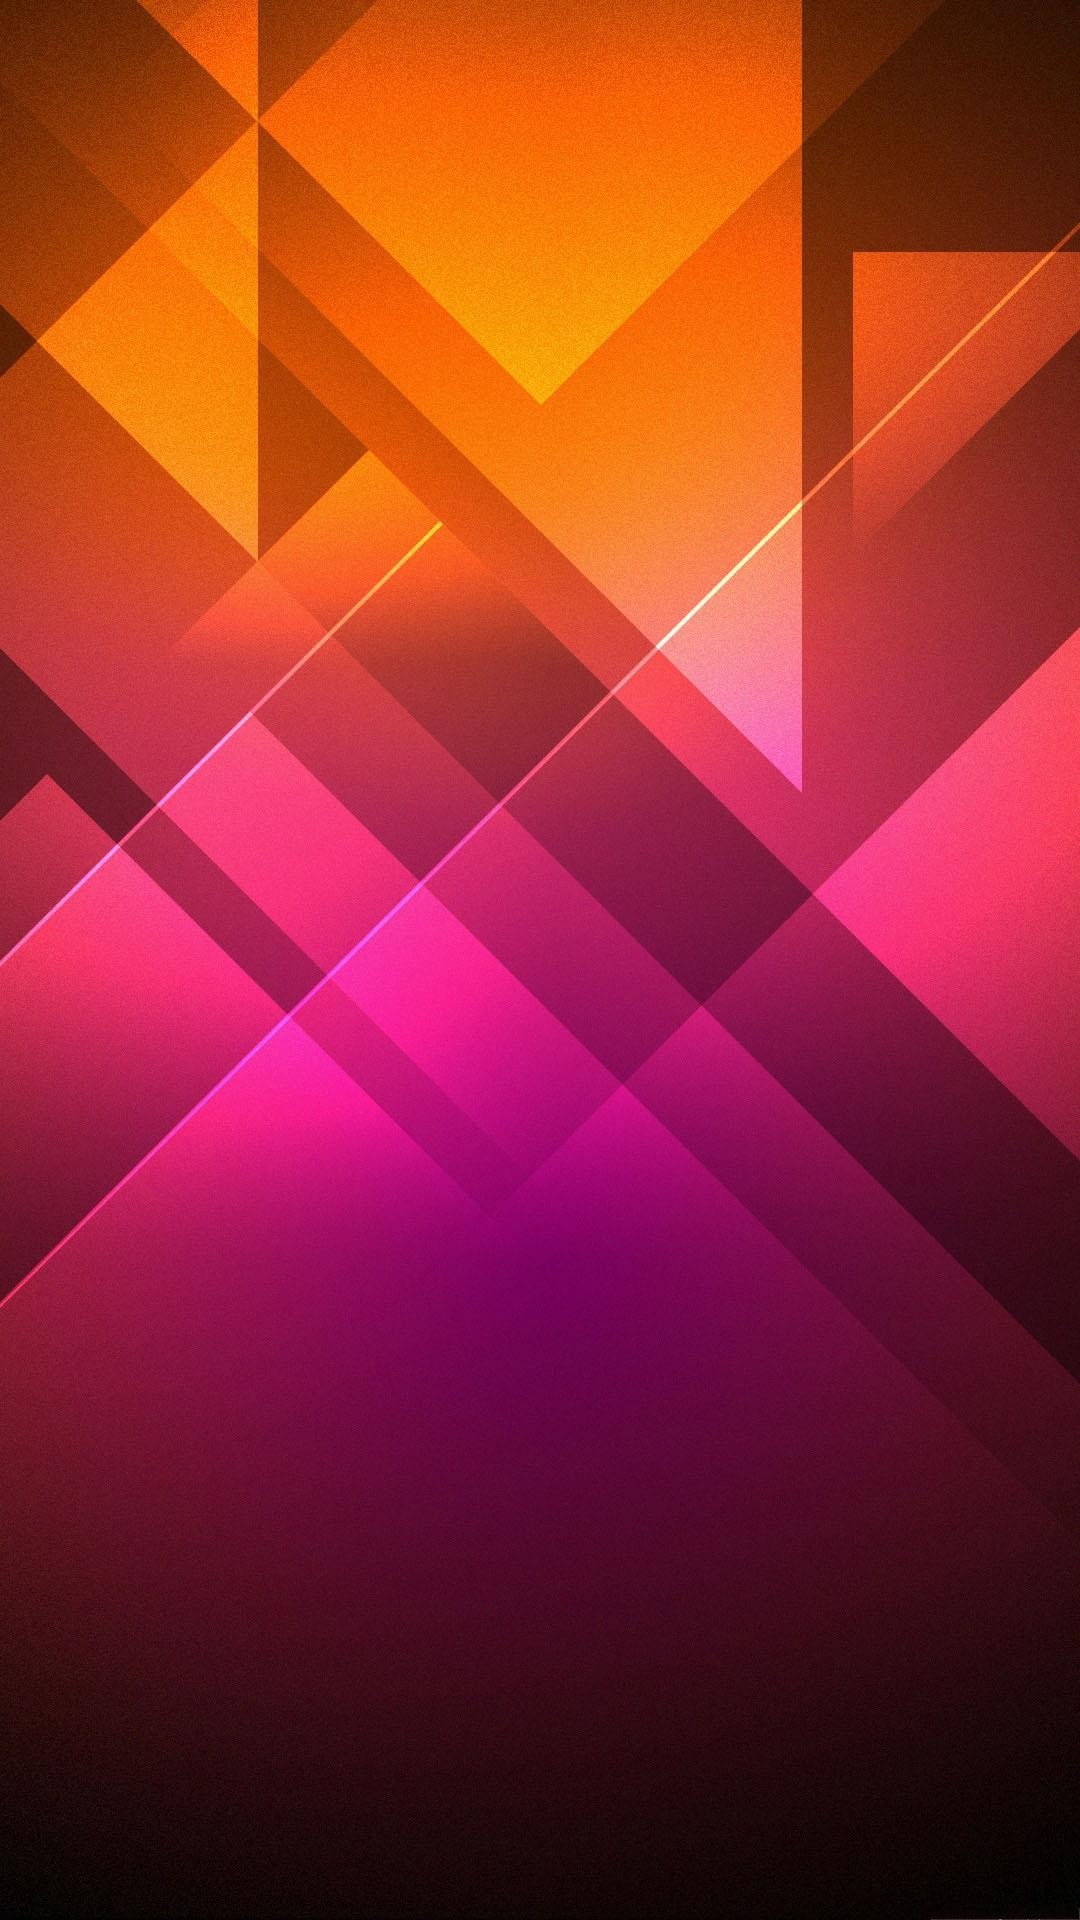 1080x1920 Wallpaper Phone Android